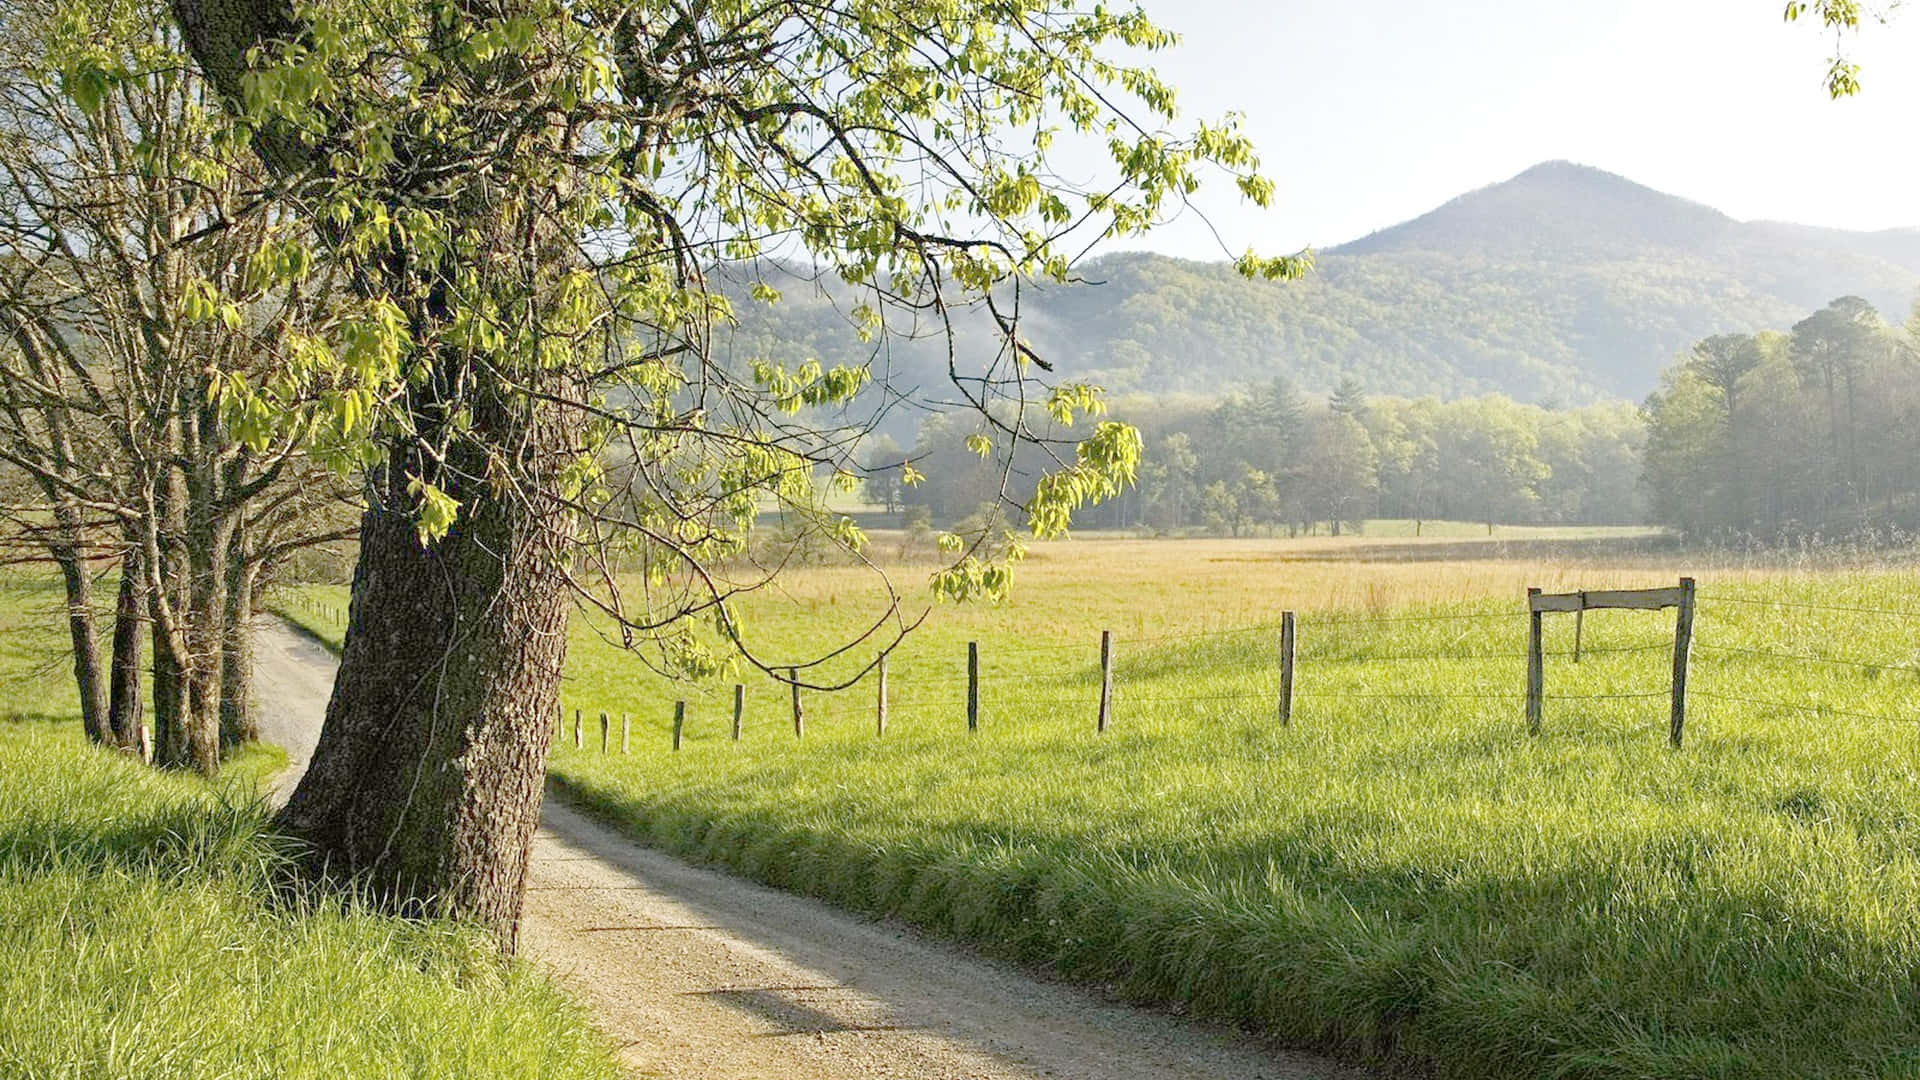 A Dirt Road Leading To A Field With Trees And Mountains